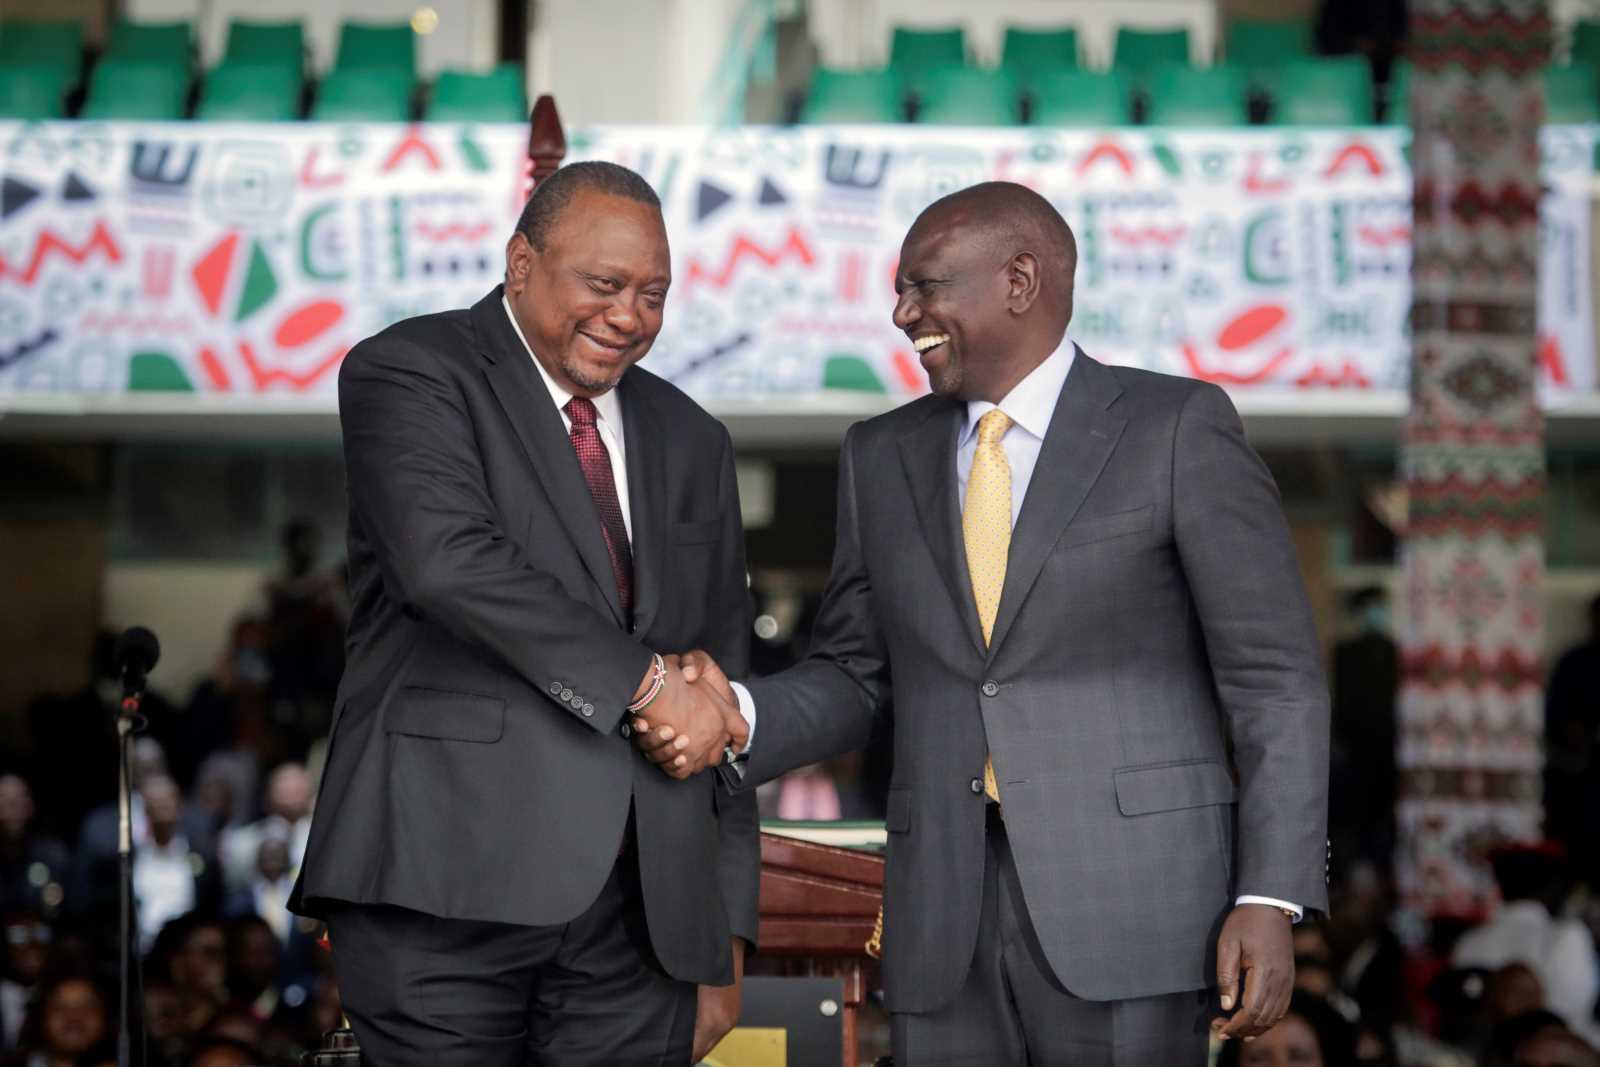 “Government revenues: Kenya’s new president wants to collect more tax money.”